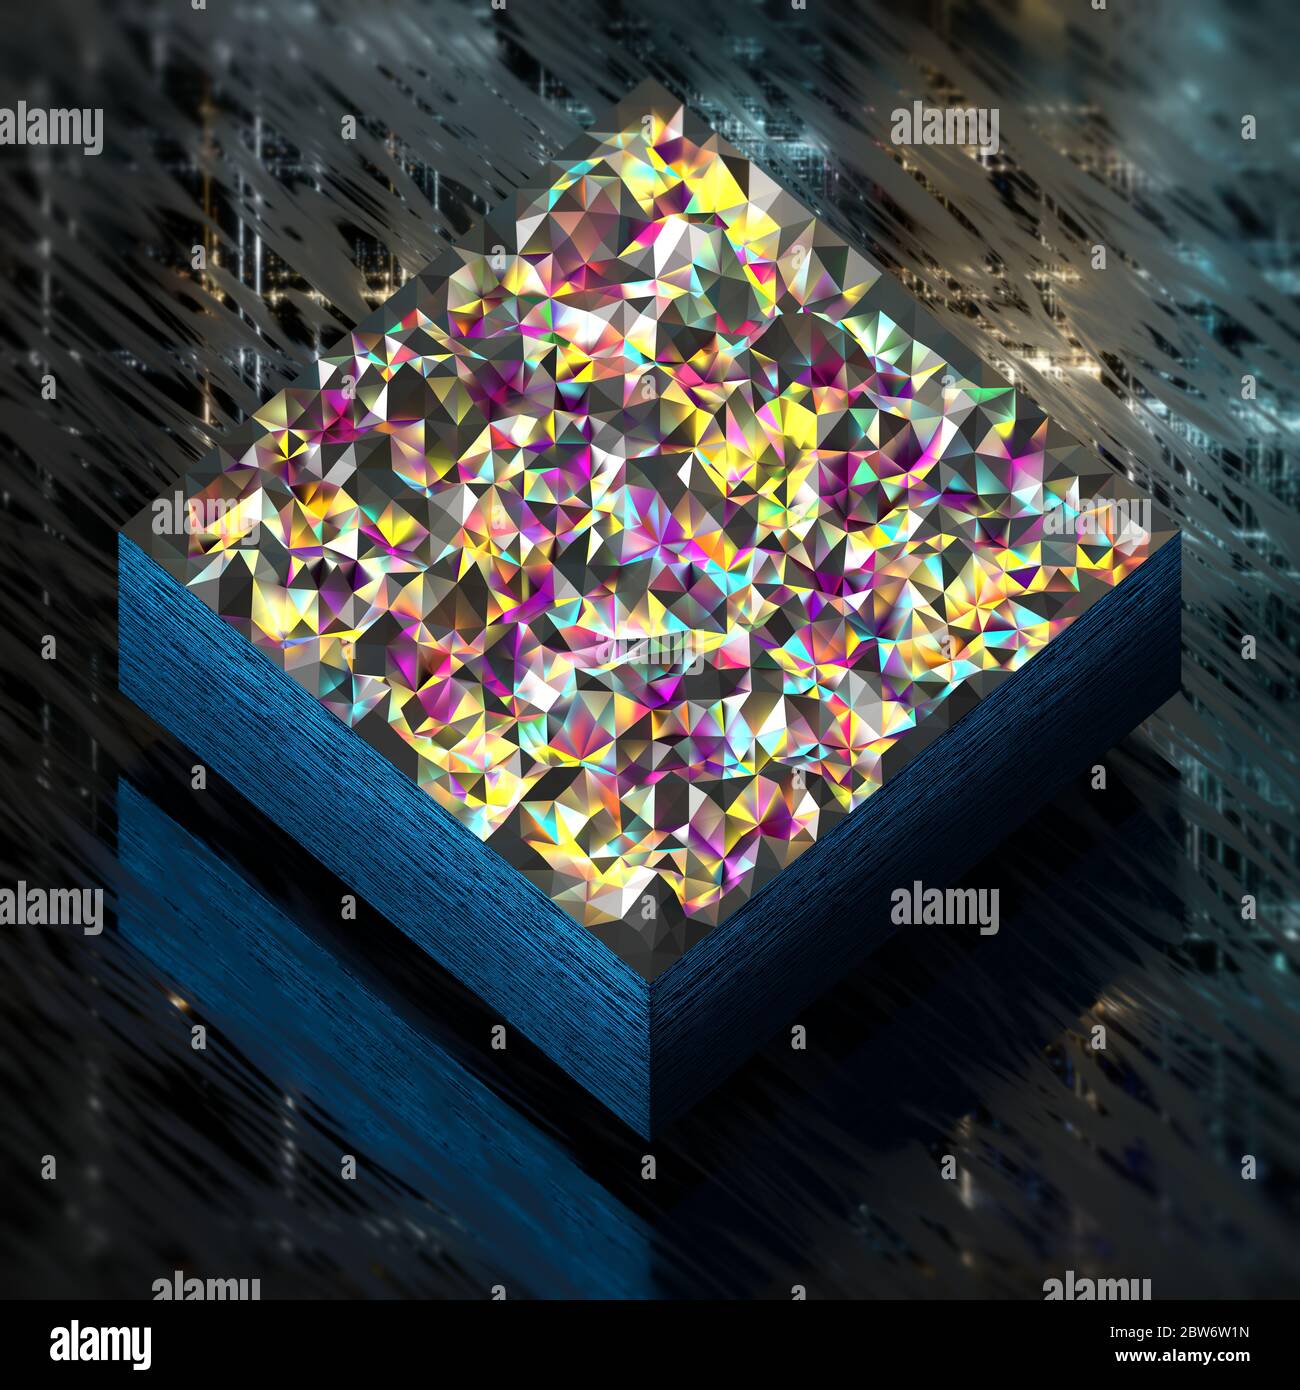 Decorative and abstract 3d square made of colored low polygons, floating on a dark and grunge surface with depth of field Stock Photo